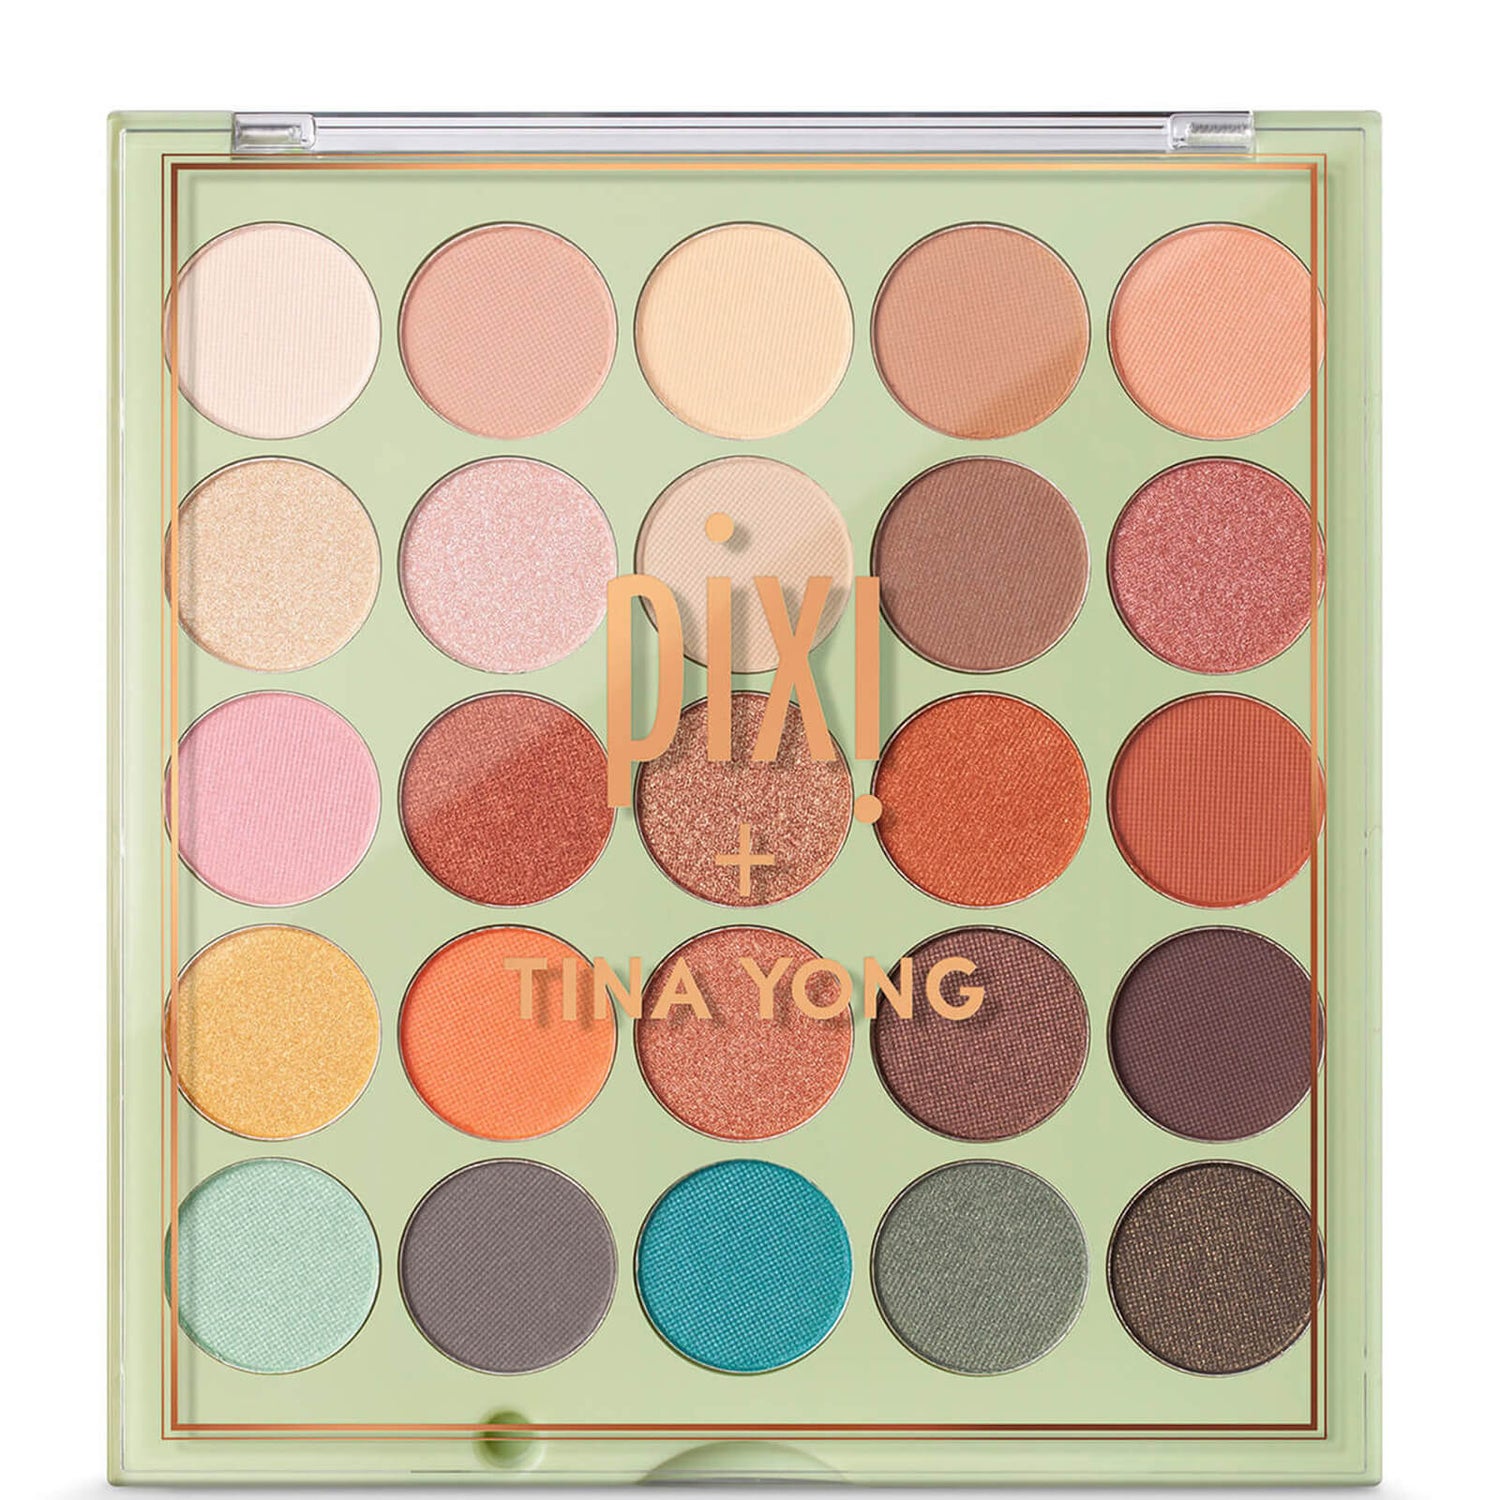 PIXI Tina Yong Tones and Textures Palette di ombretti 22g